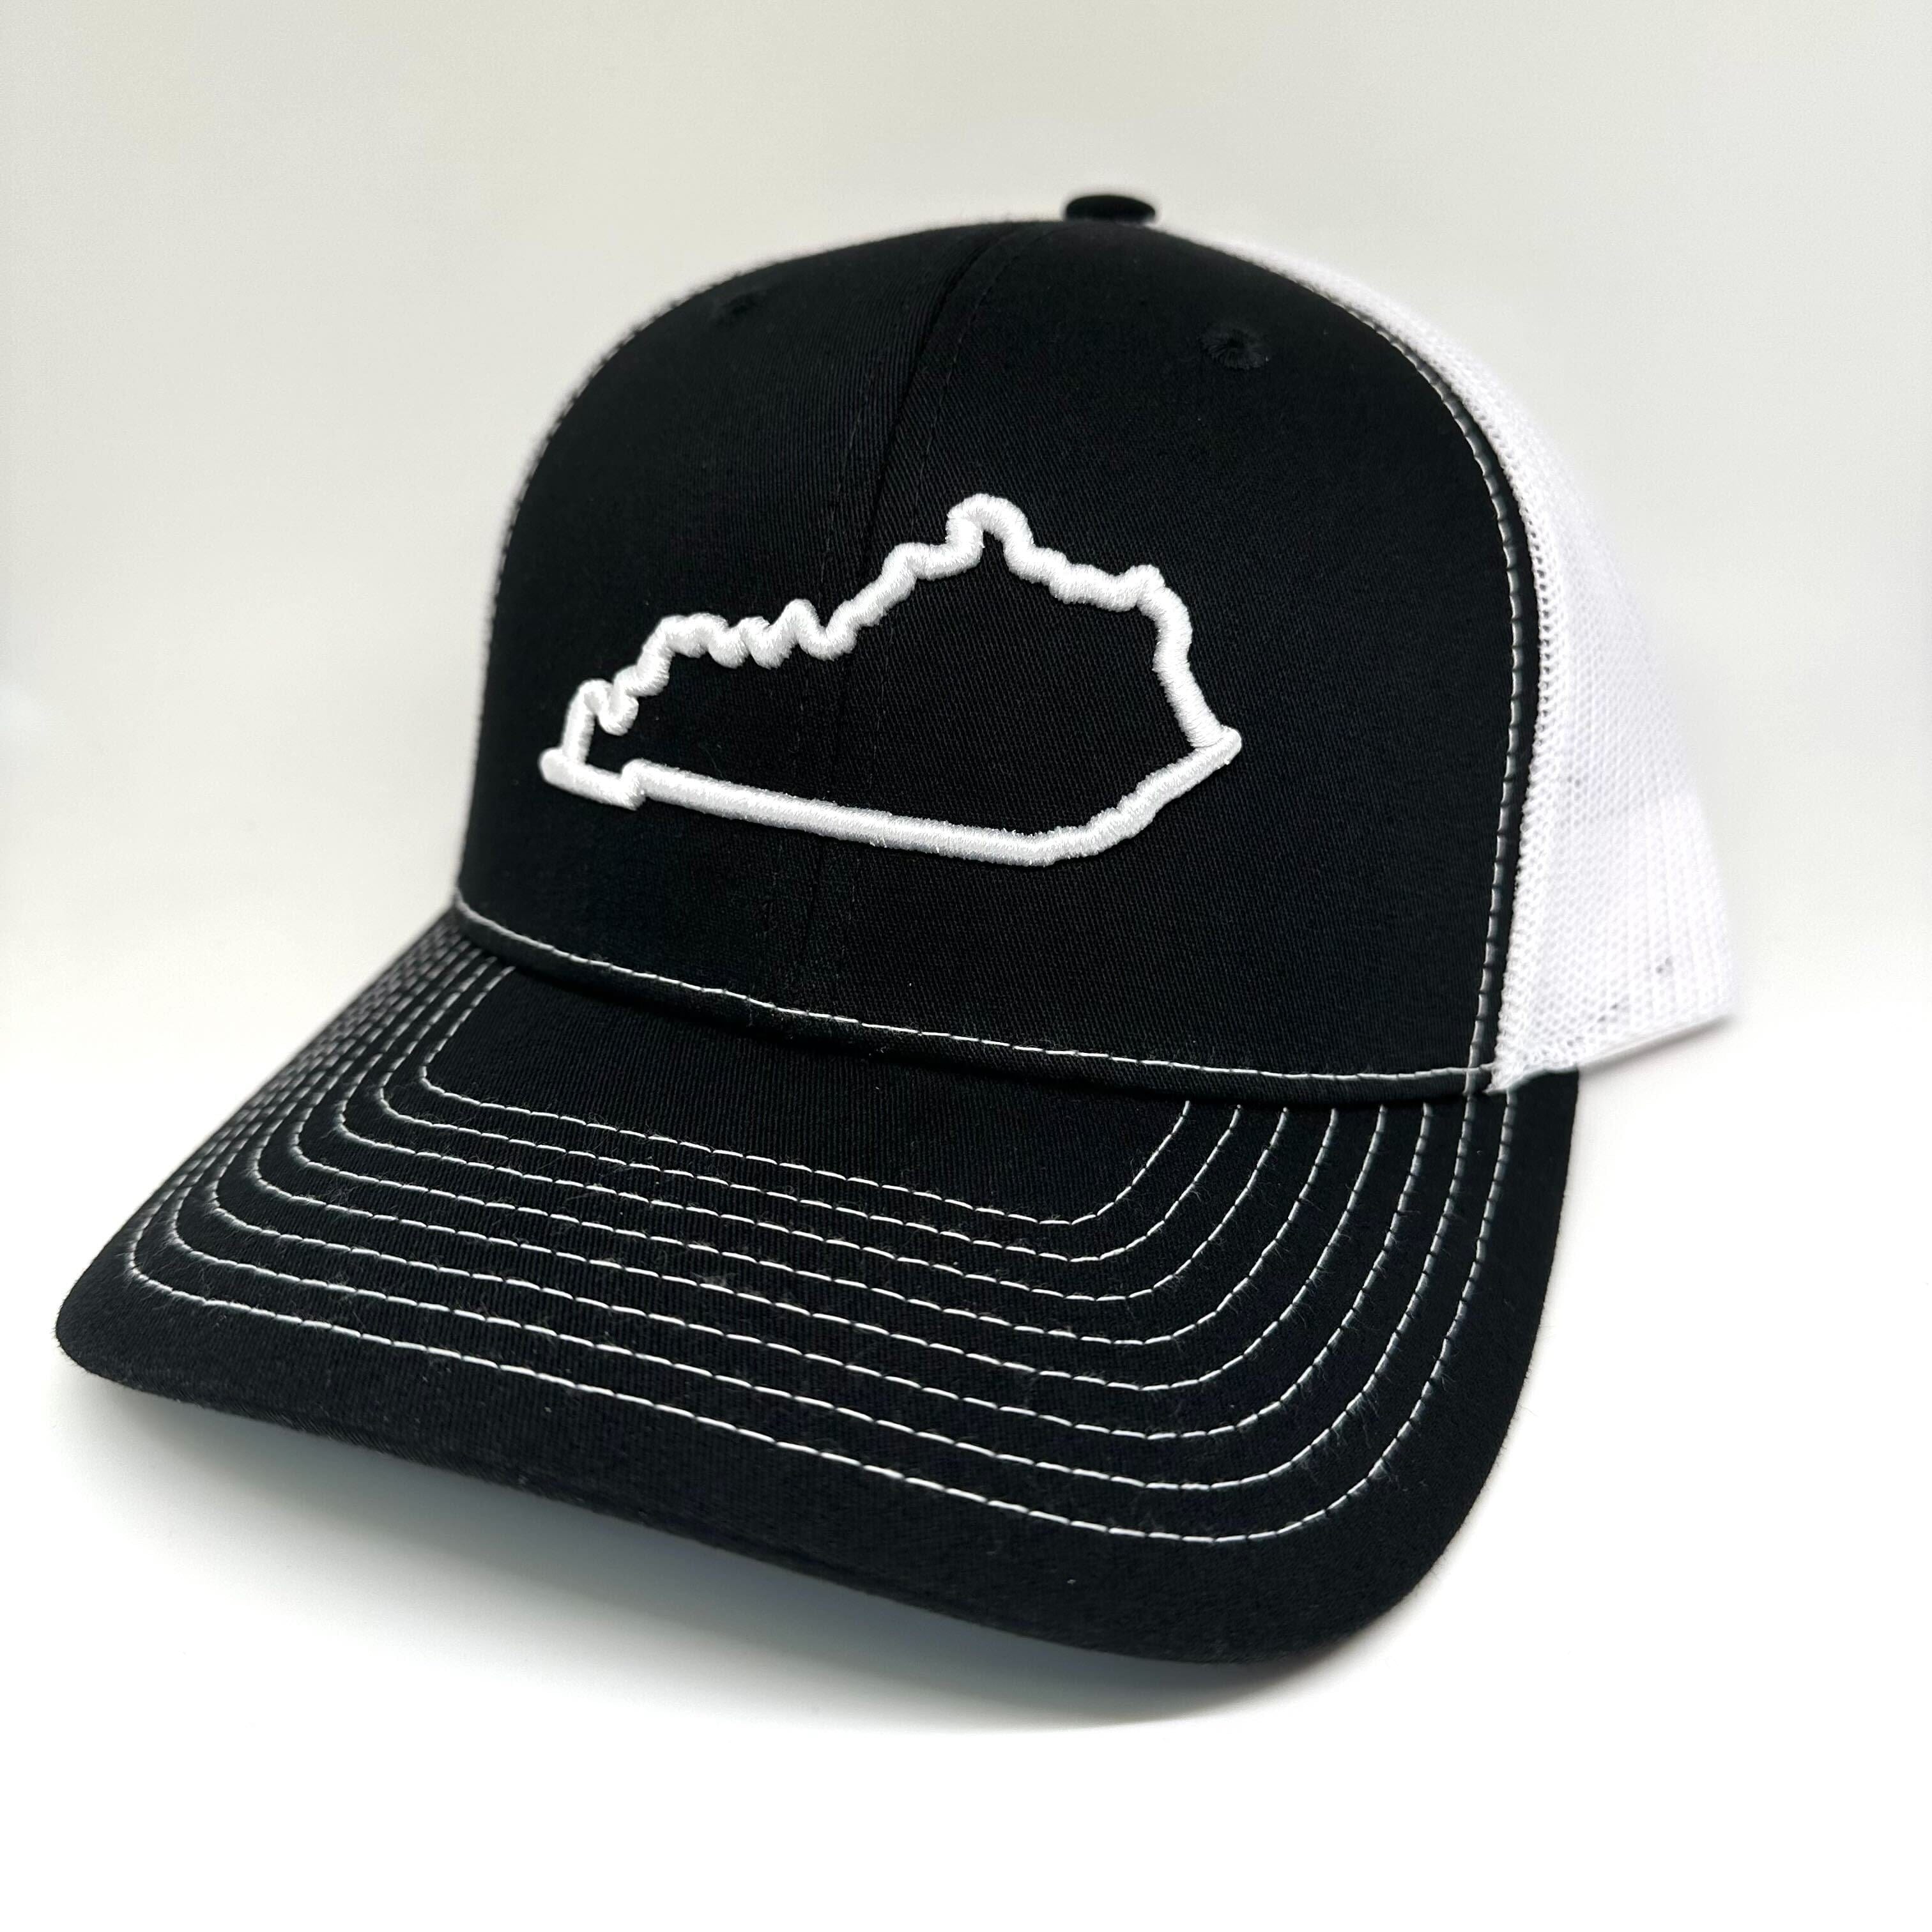 Thumbnail for Old Kentucky Home Embroidery Hat - Greater Half